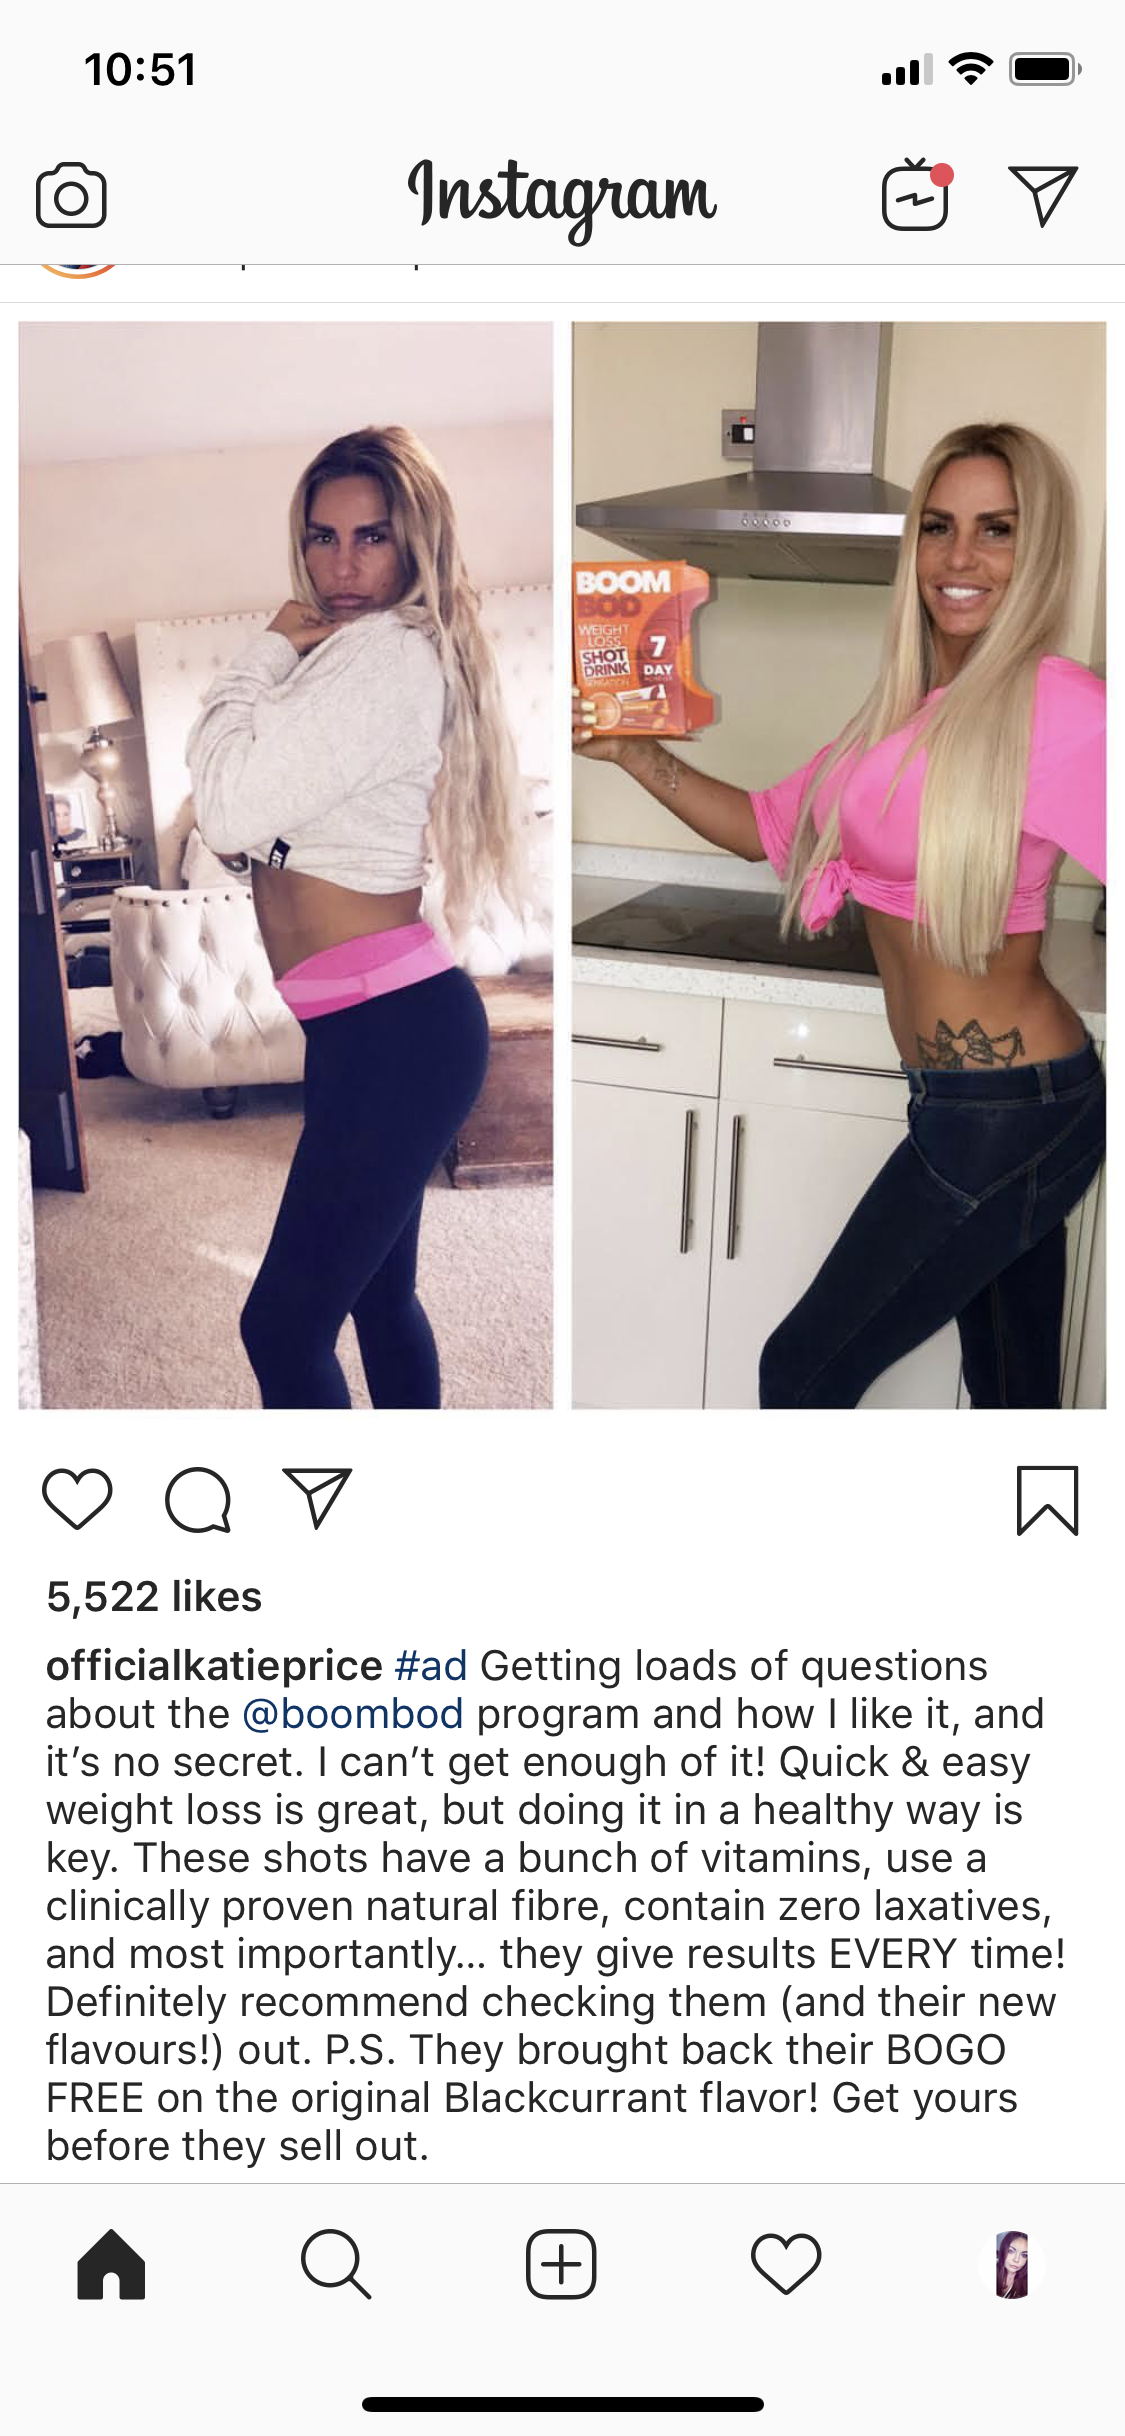 A BoomBod ad from Katie Price's Instagram page. (ASA/PA)